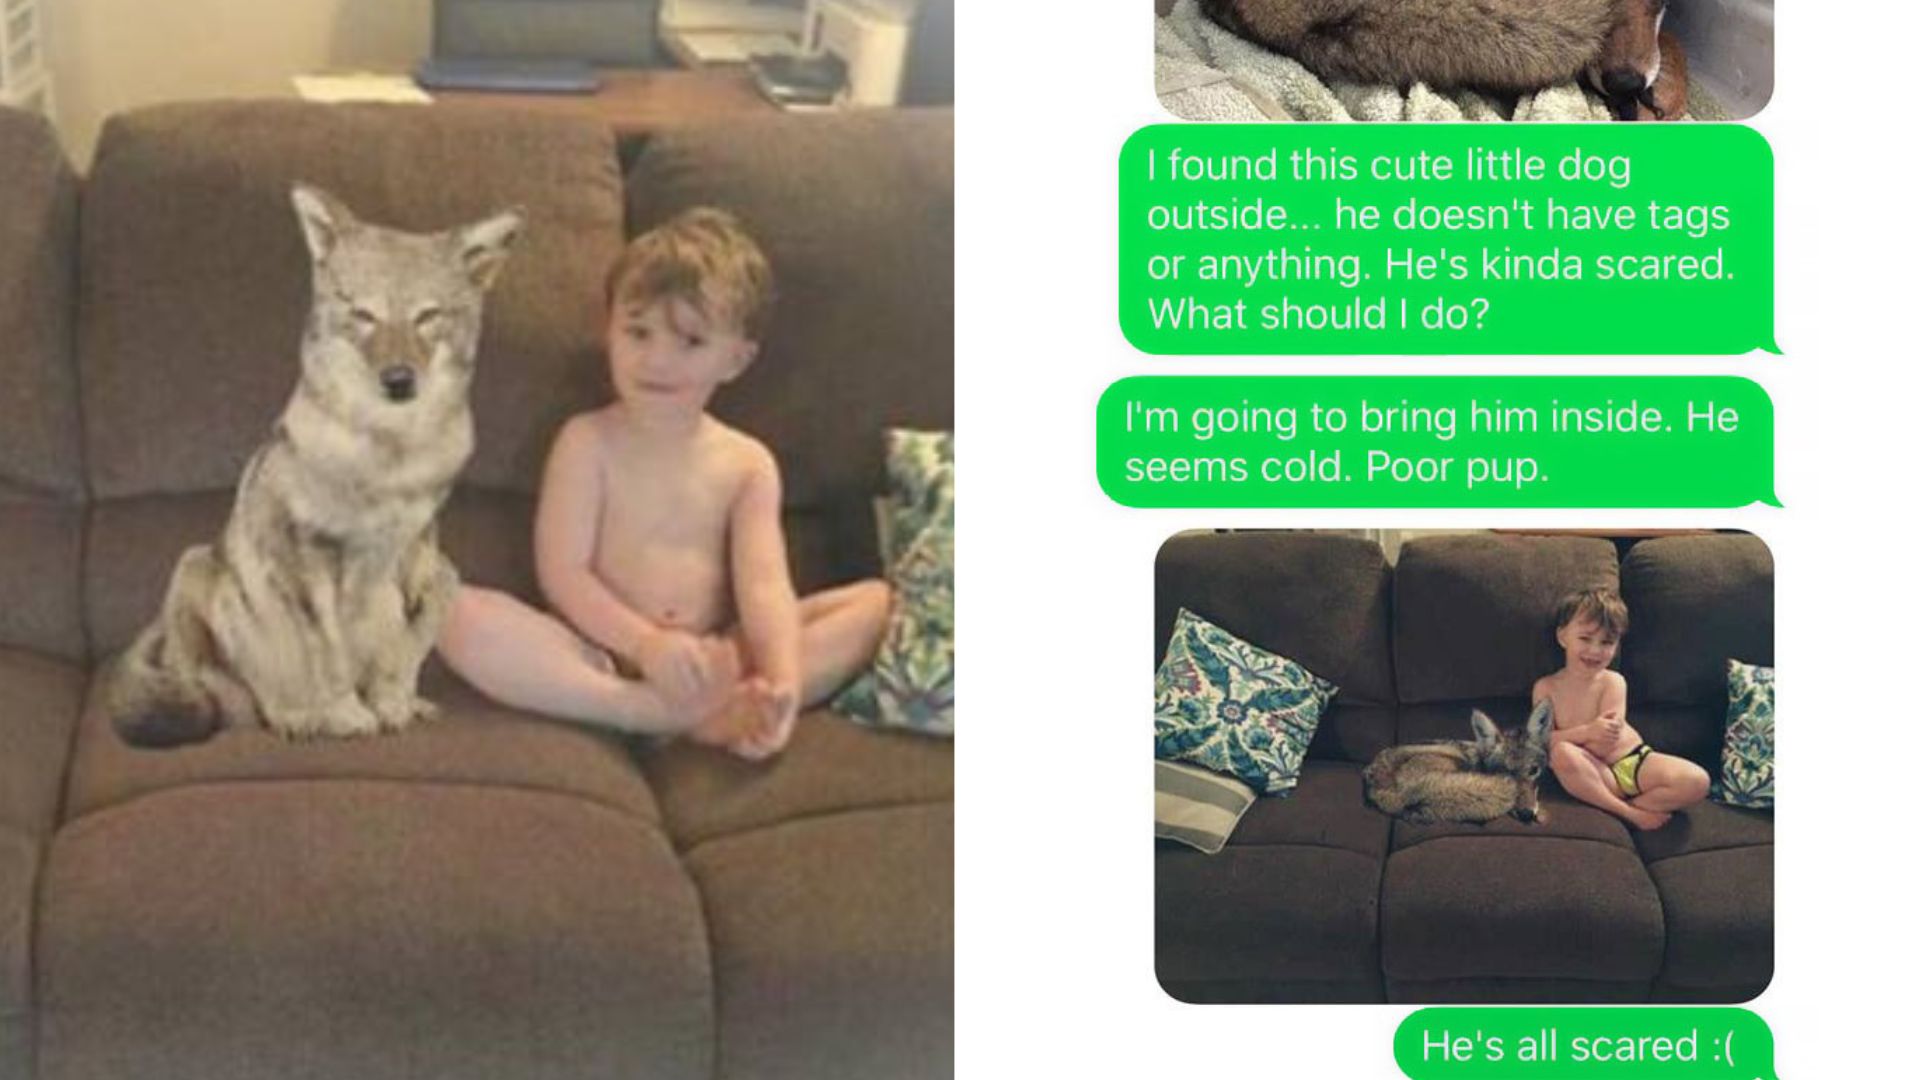 Oregon Woman Pranks Her Husband Into Thinking She Brought Home A Wild Animal